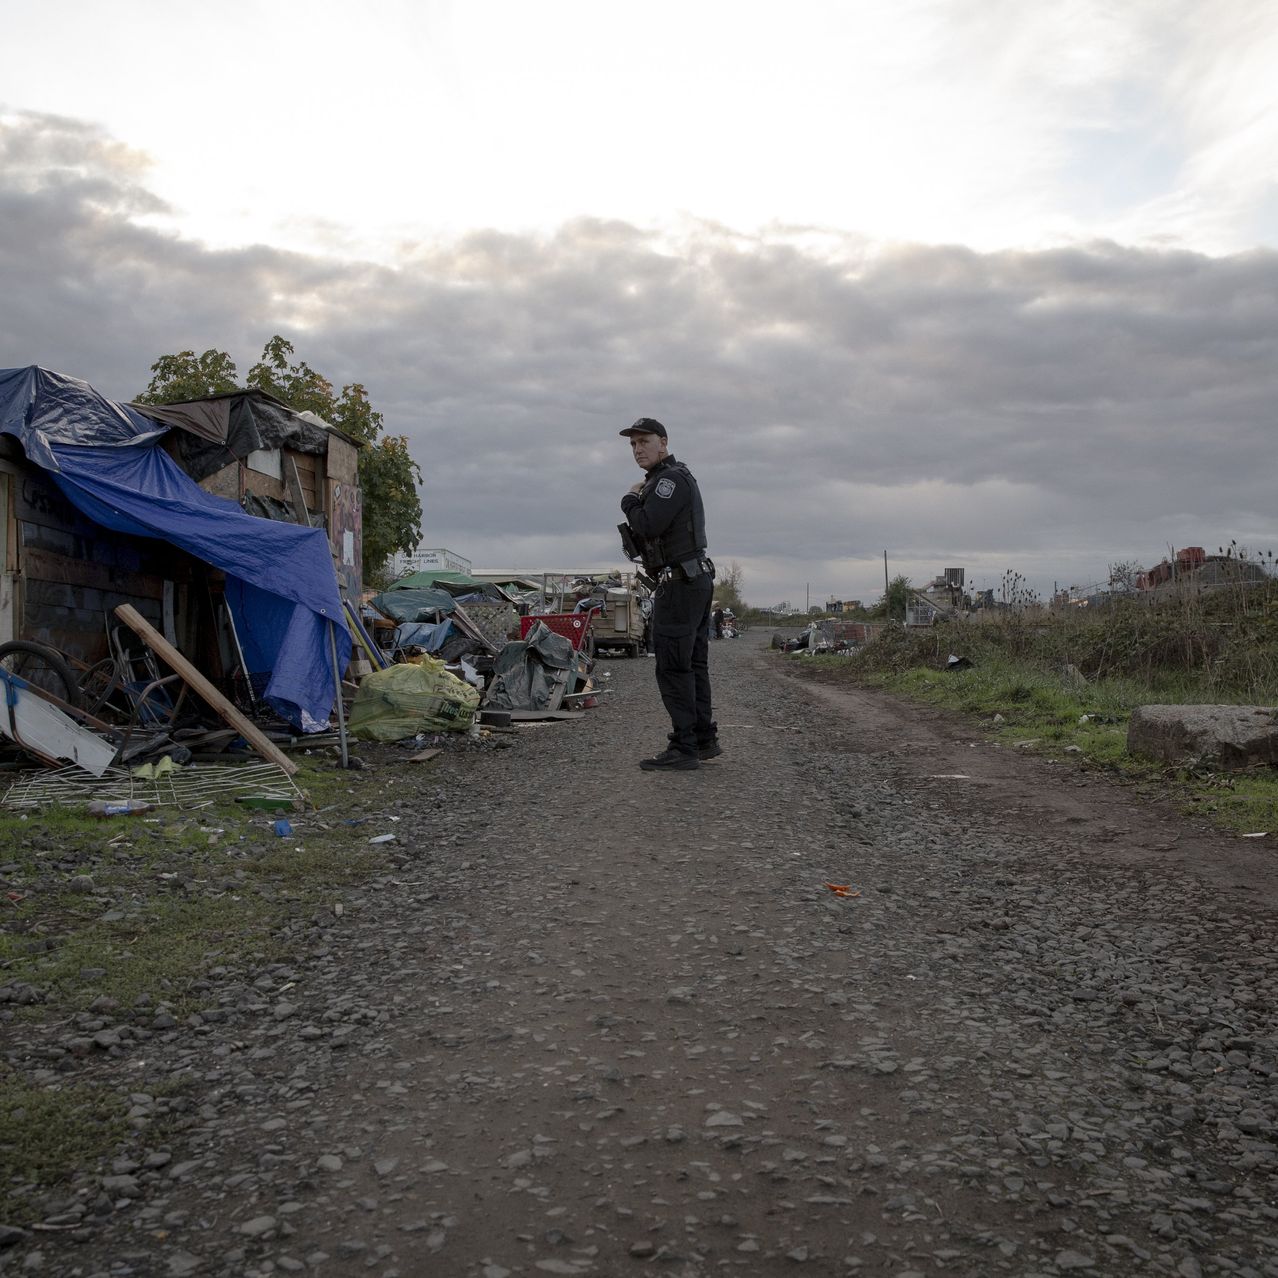 Officer Jose Alvarez of the Eugene Police Department recently visited an encampment for homeless people.